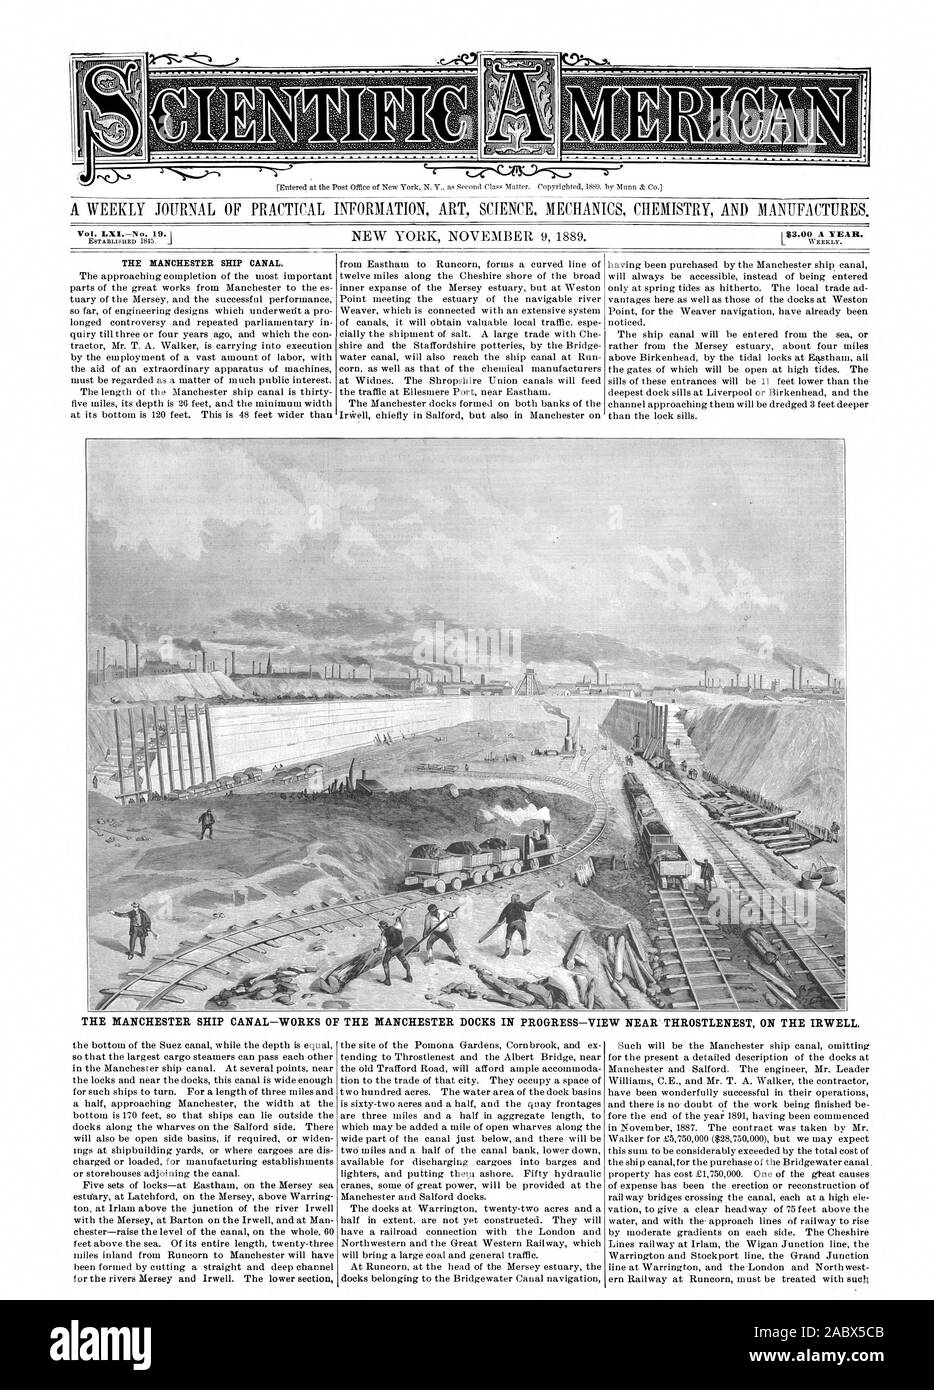 Entered at the Post Office of New York N. Y. as Second Class Matter. Copyrighted 1889. by Munn & Co. Vol. LXINo. 19.1 THE MANCHESTER SHIP CANAL., scientific american, 1889-11-09 Stock Photo